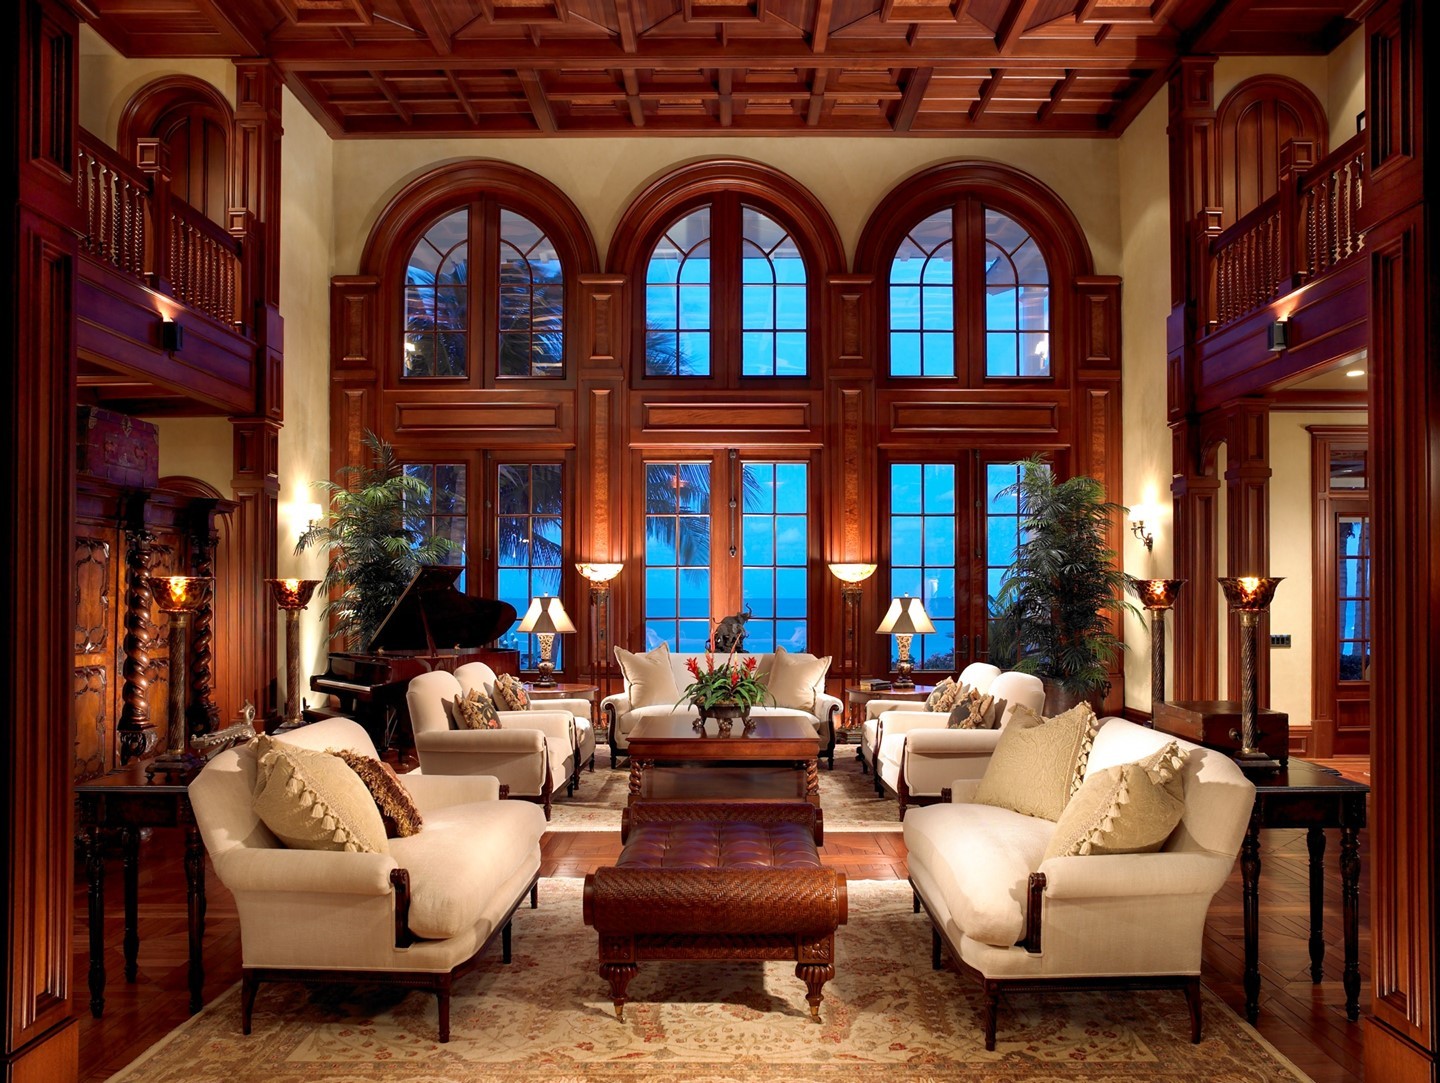 Luxury was top priority for this Florida coastal home